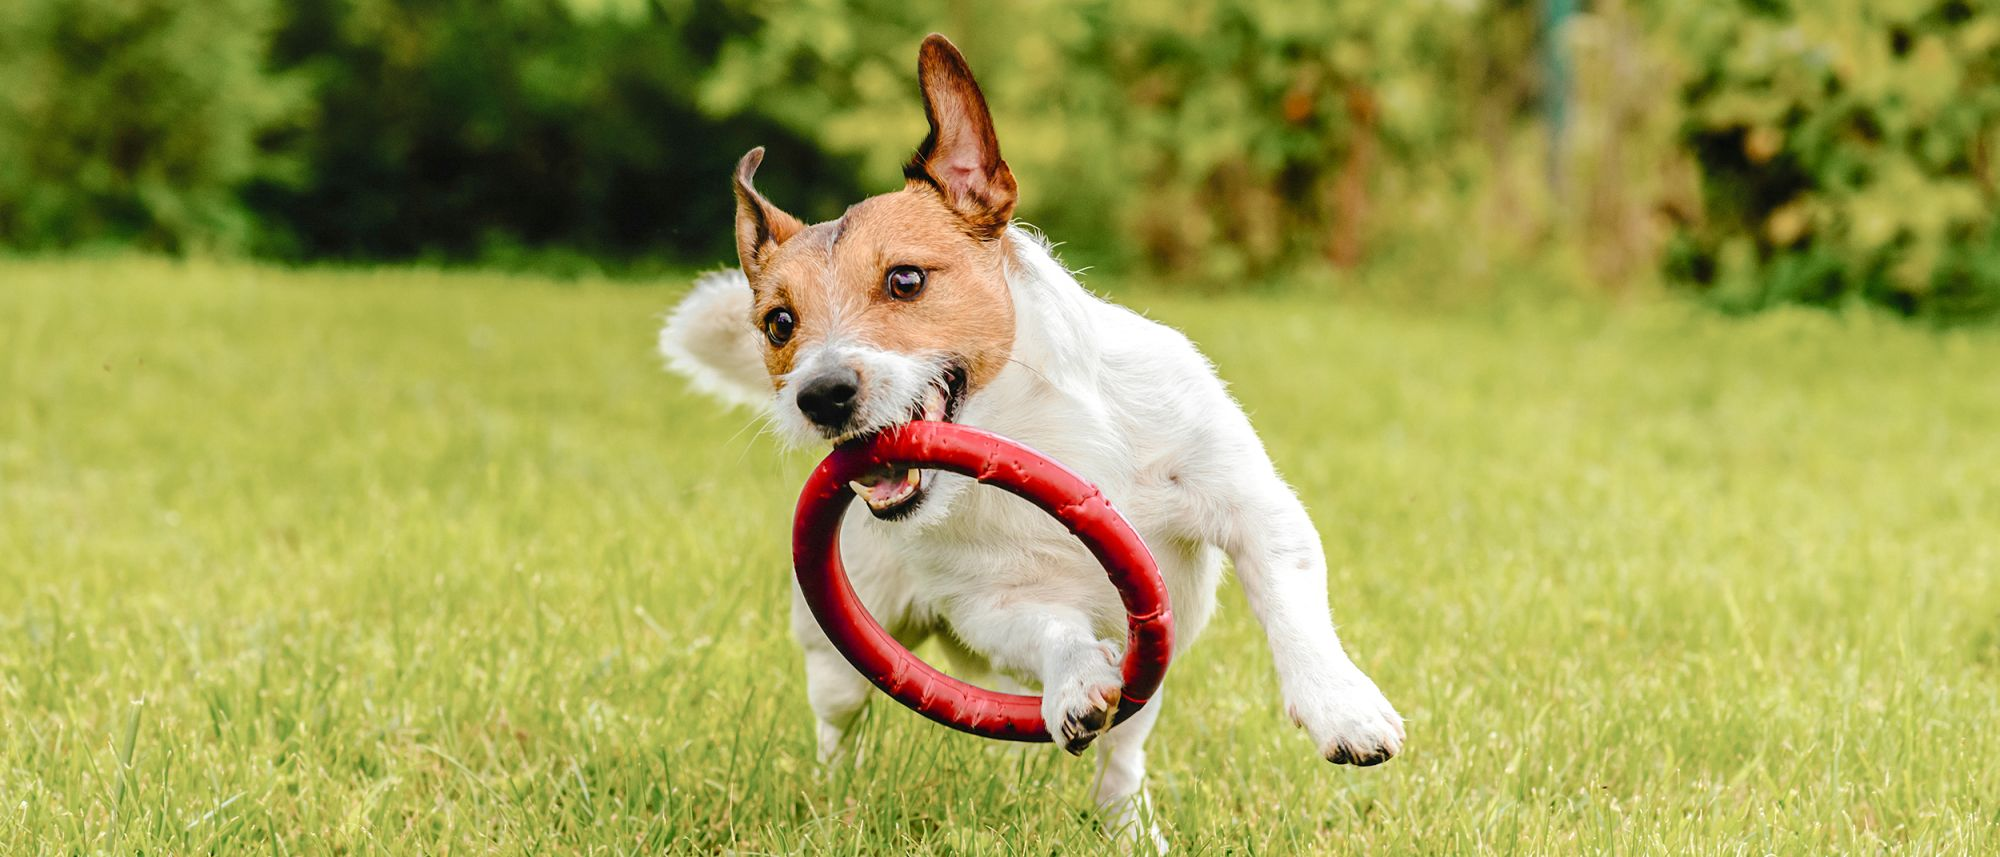 Dog playing outside with a red hoop